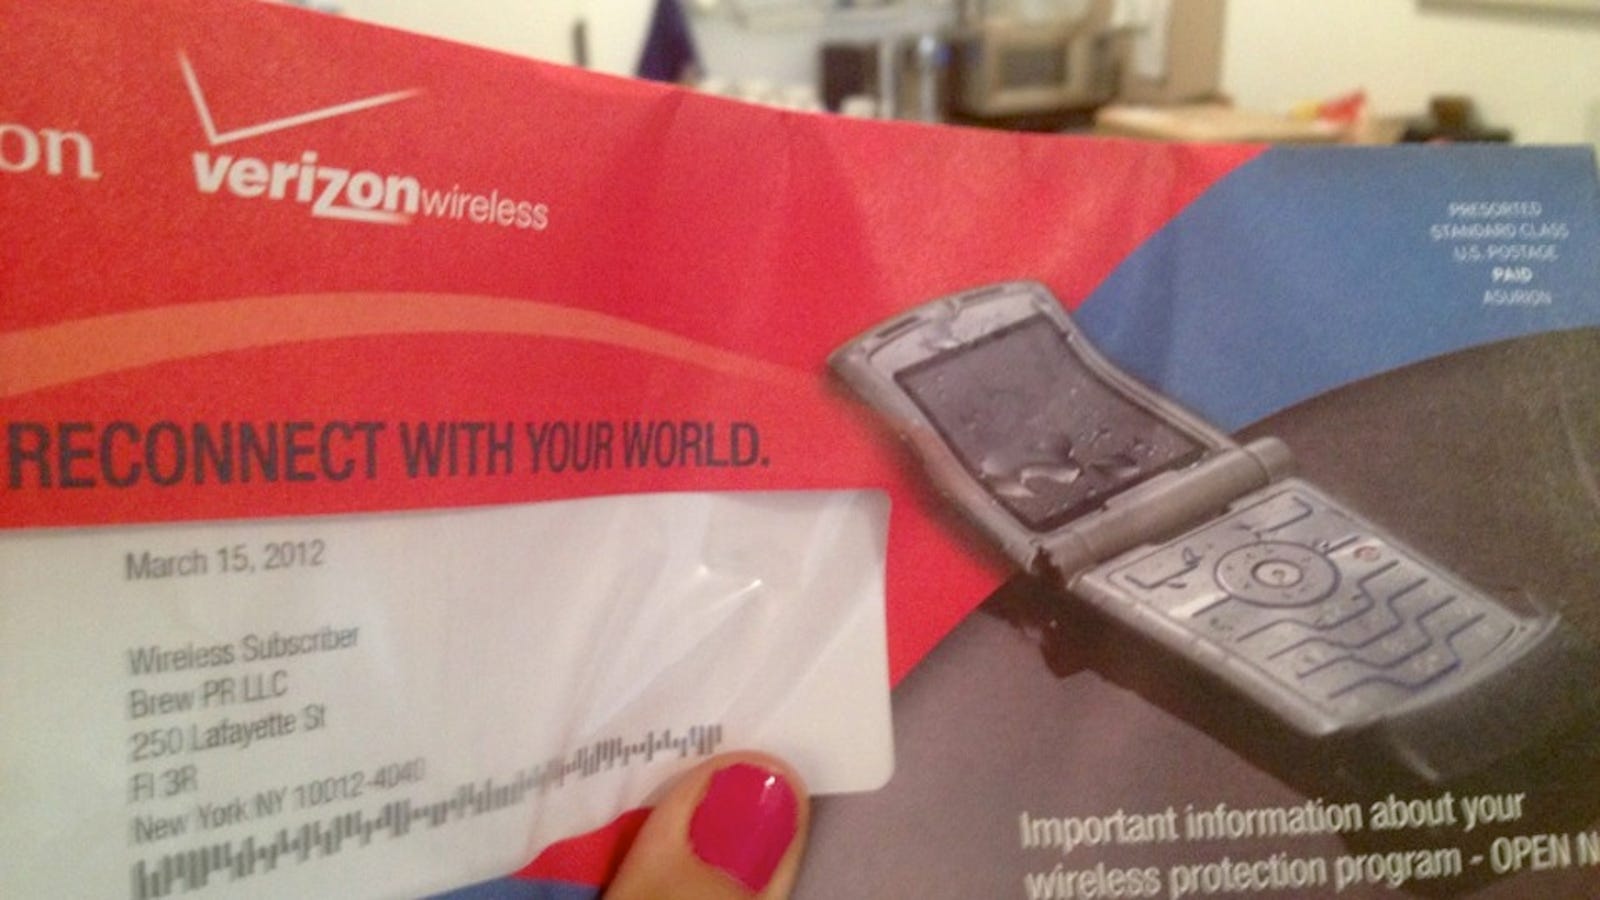 Why Is Verizon Advertising A Phone From 9 Years Ago